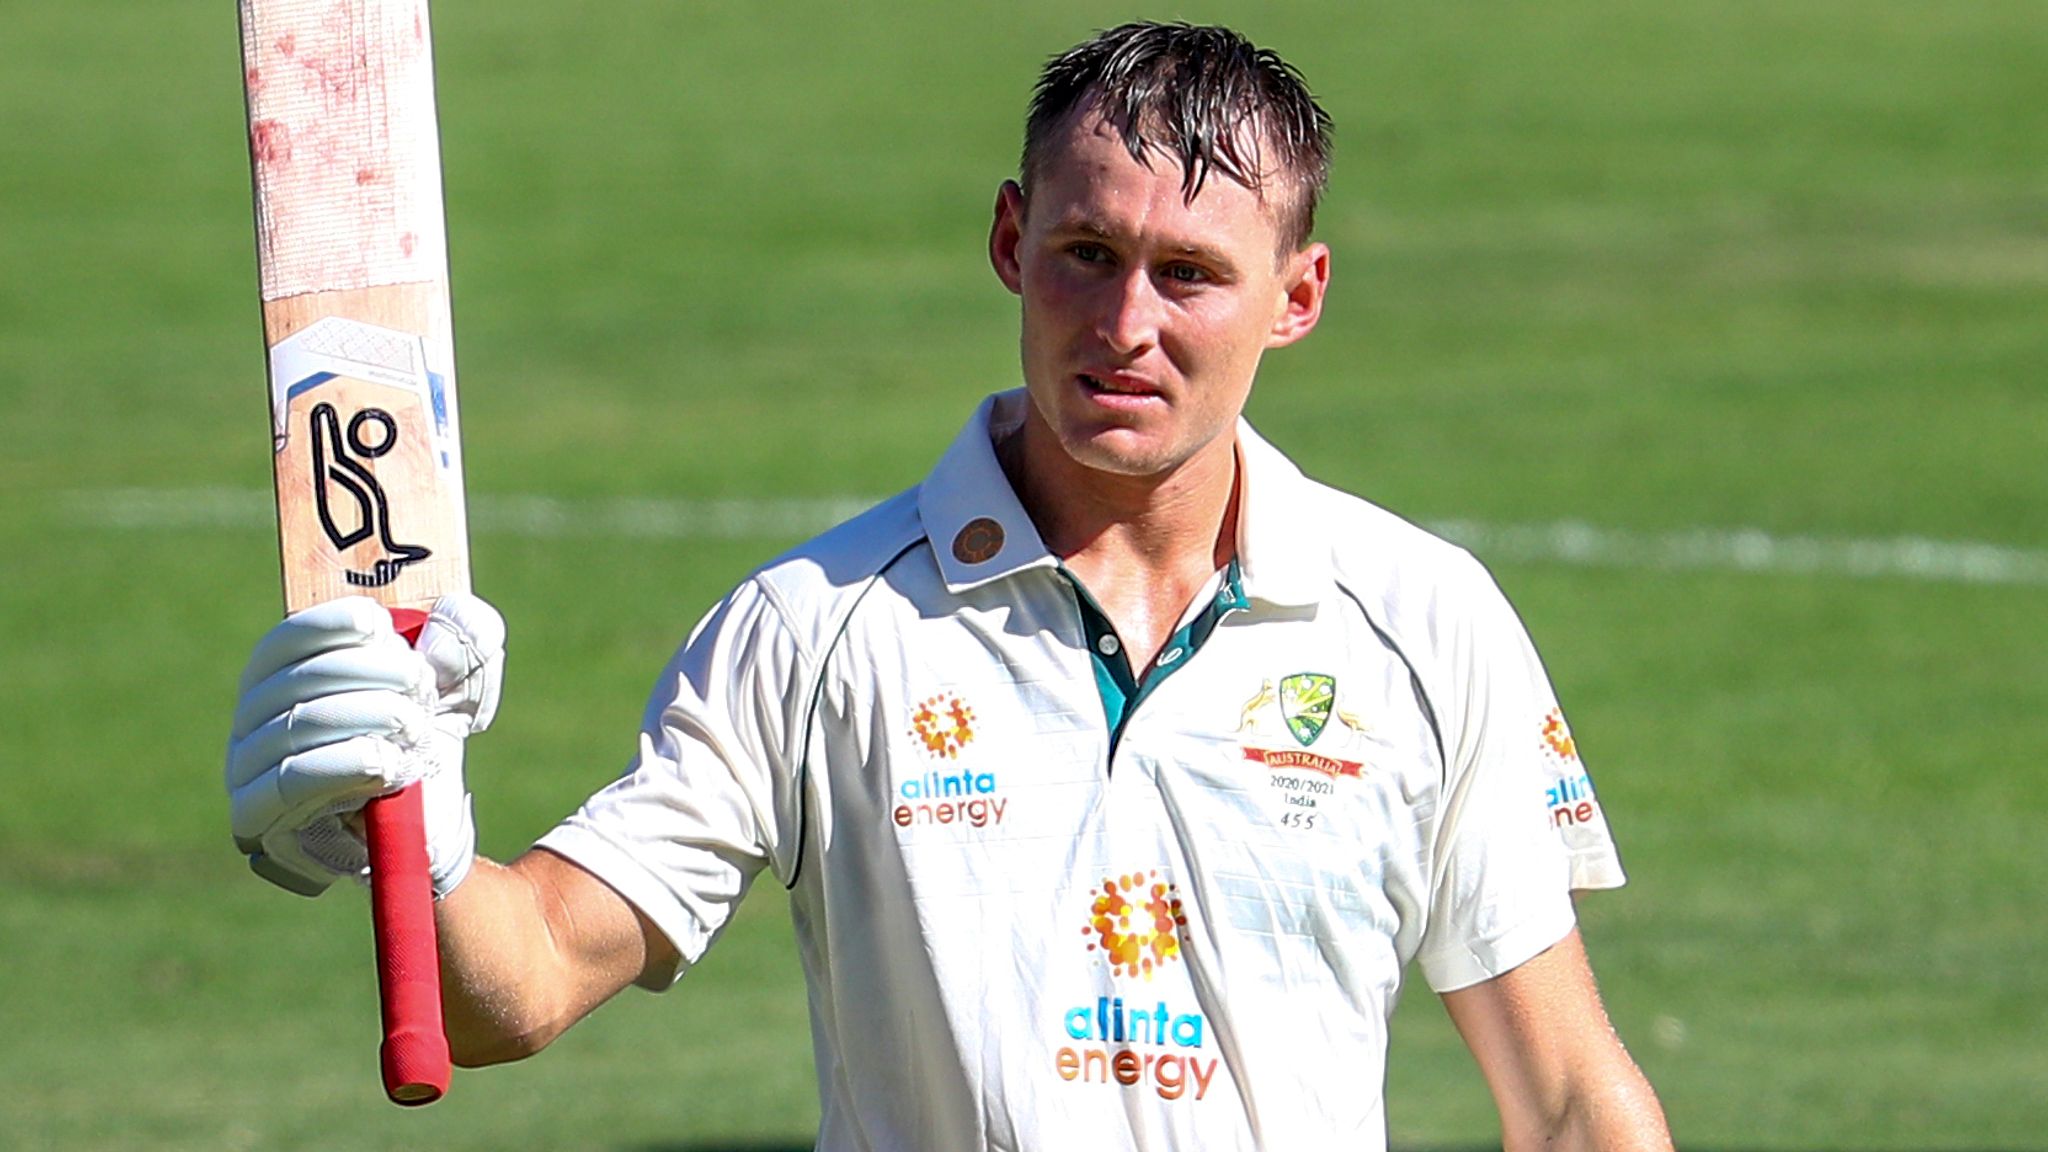 Australian Cricketer MarnusLabuschagne hopeful full strength England Under concerns the Ashes will be played!